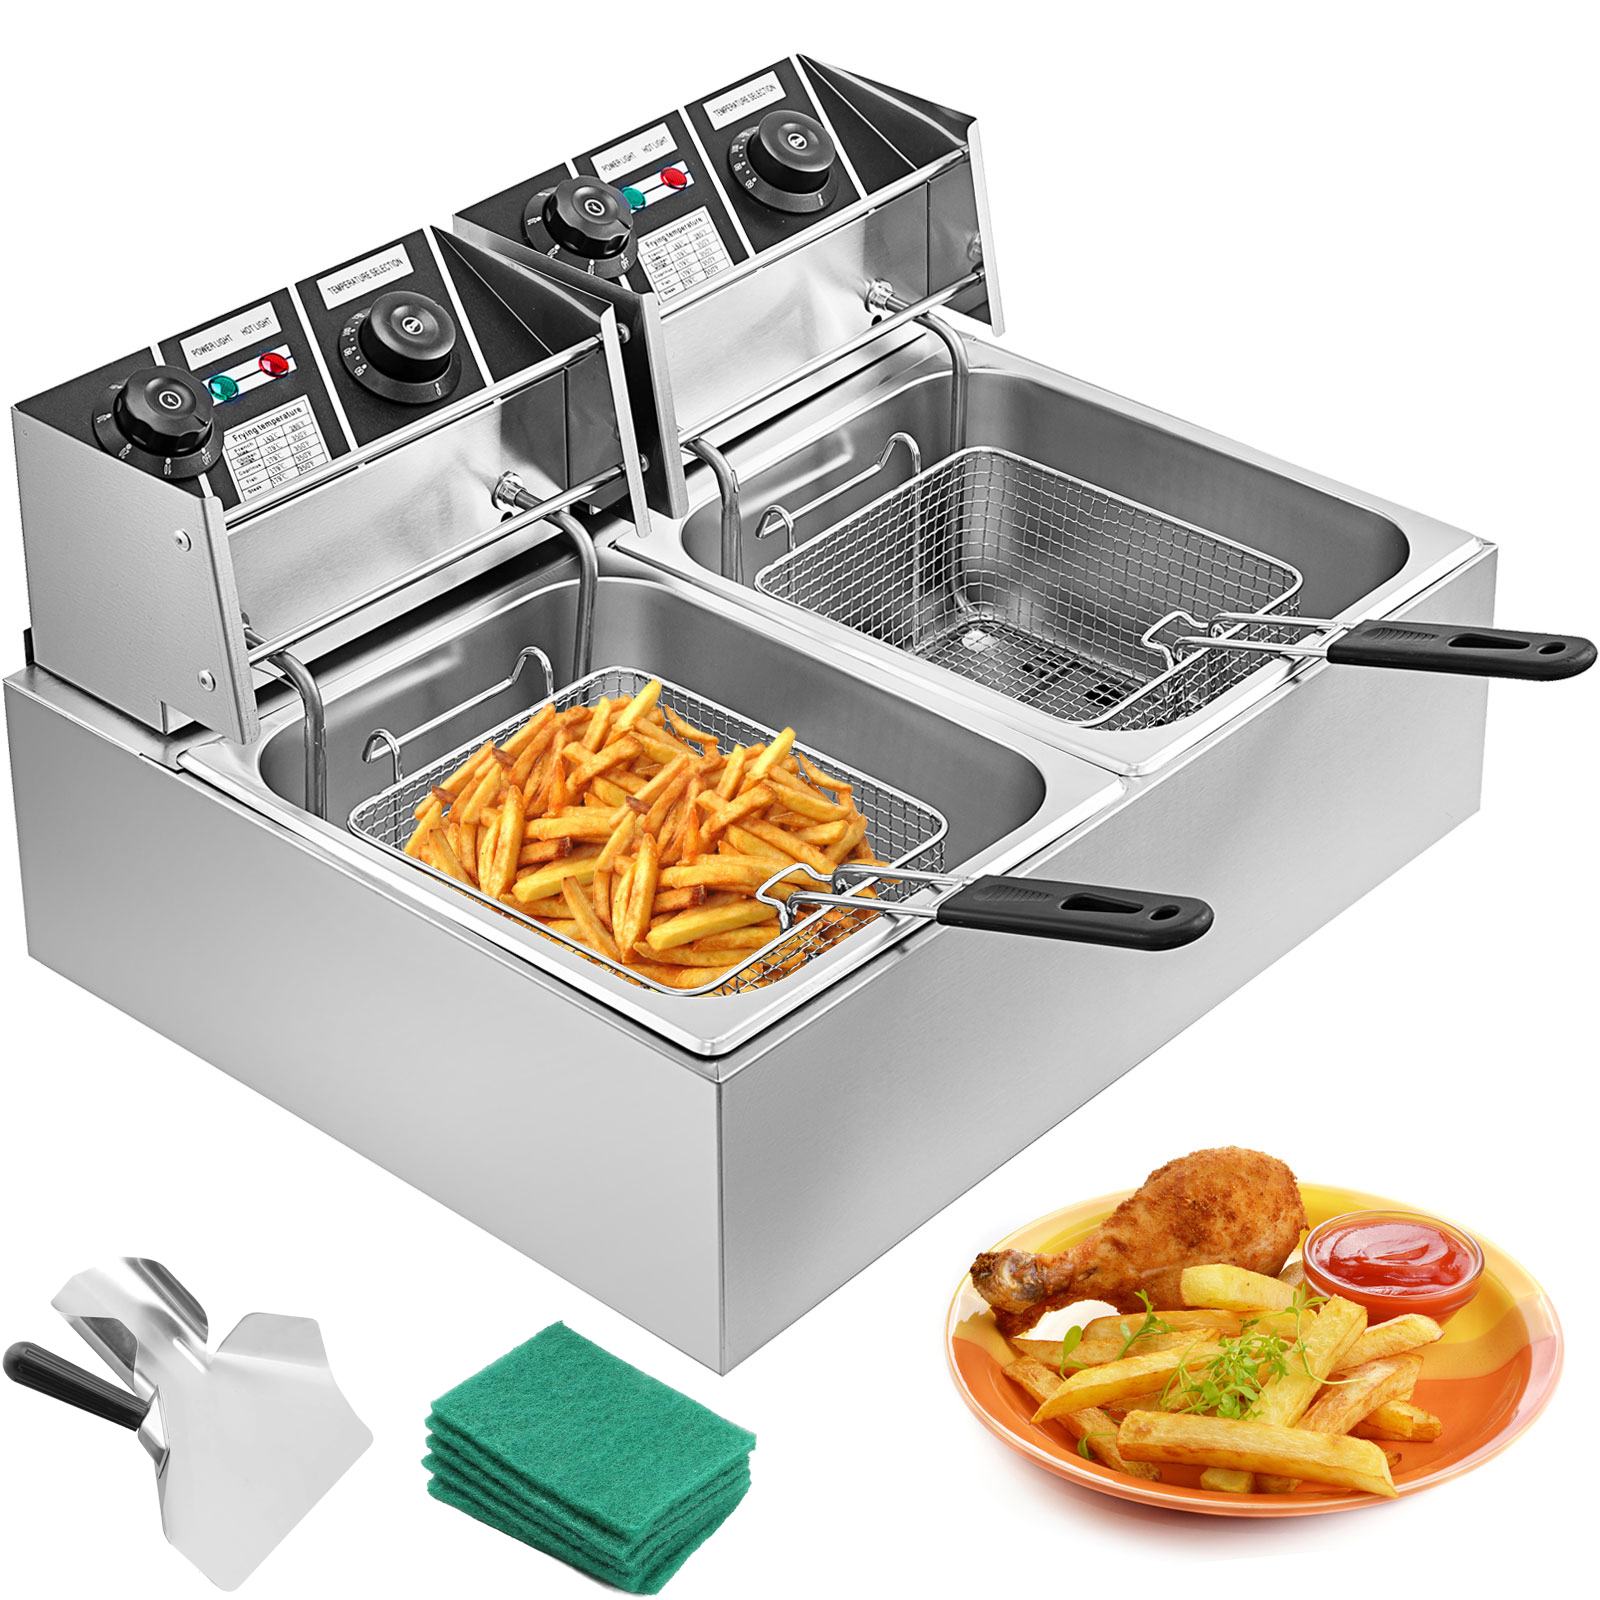 pack of 2 13 1/4 x 6 1/2 x 6 Deep Fryer Basket with Non-slip Handle Commercial Restaurant Kitchen Chip Fish 